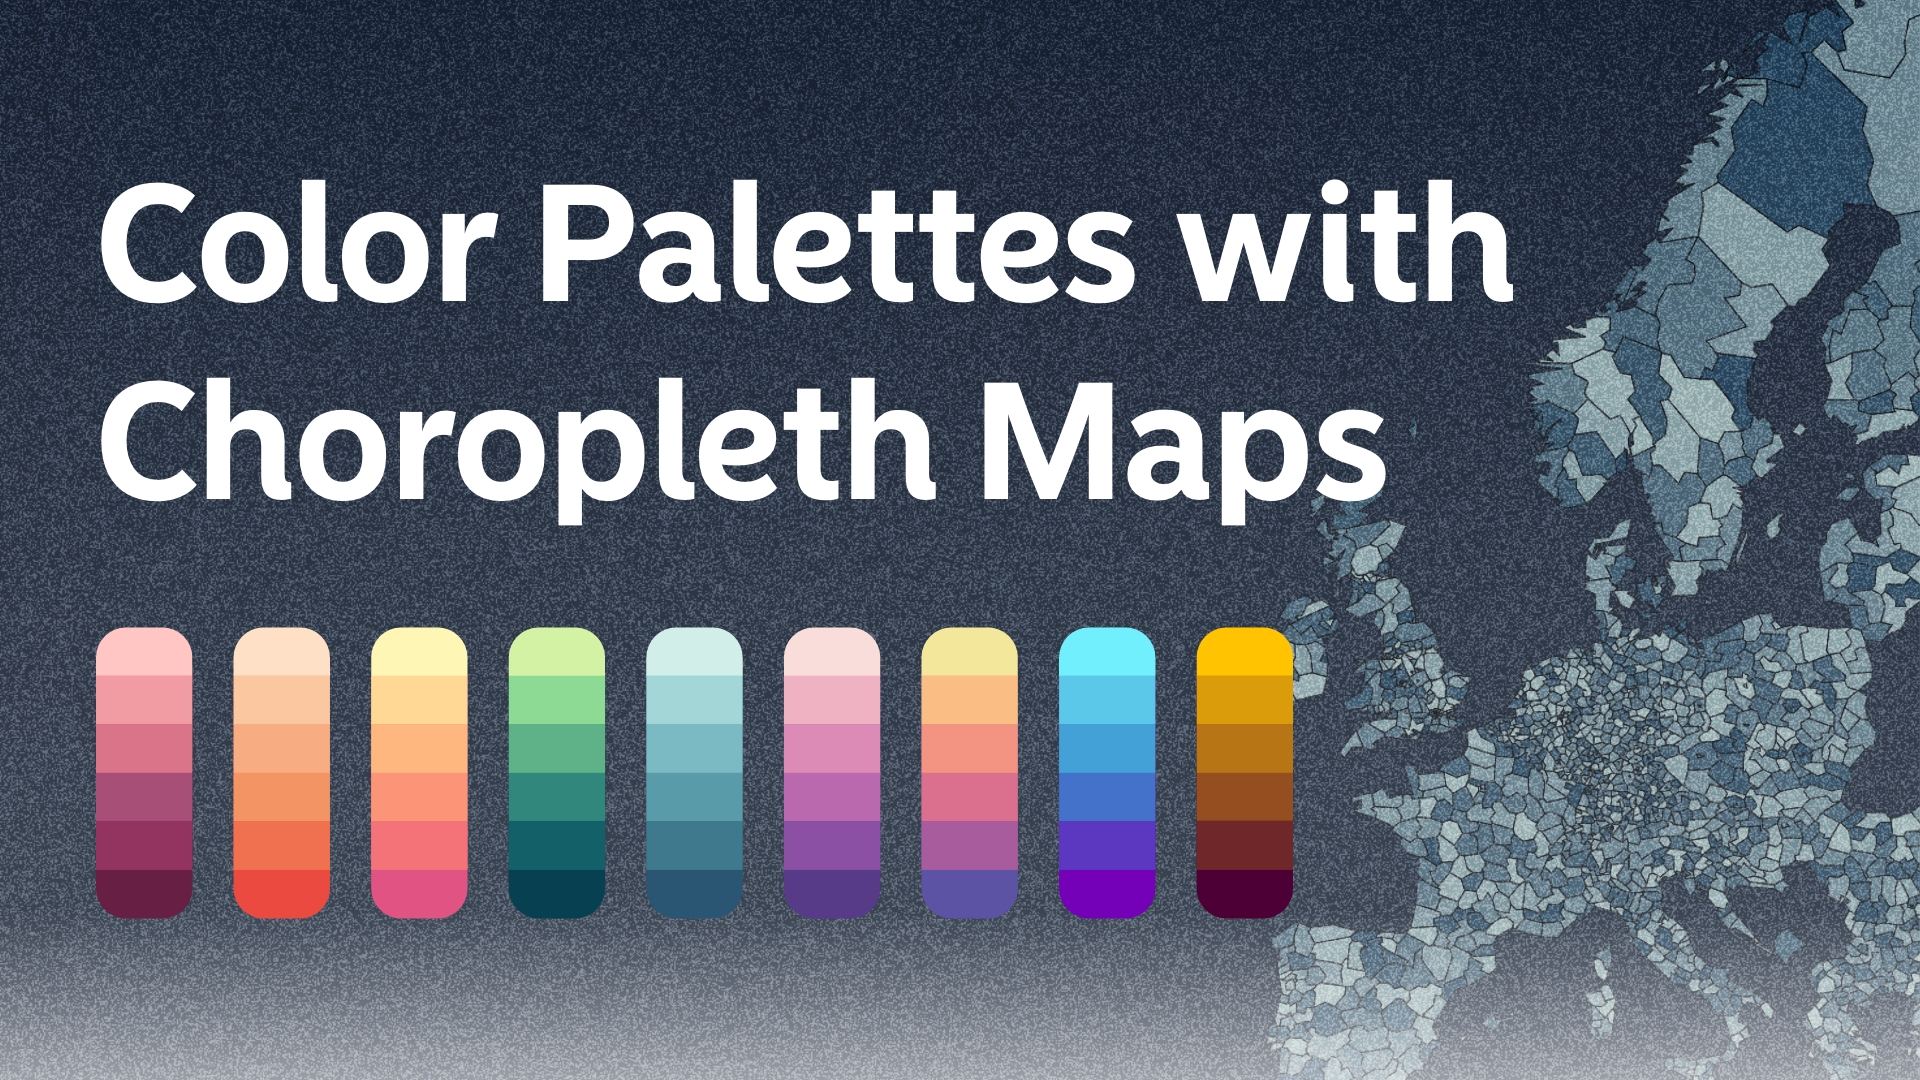 Get better at using color palettes with choropleth maps